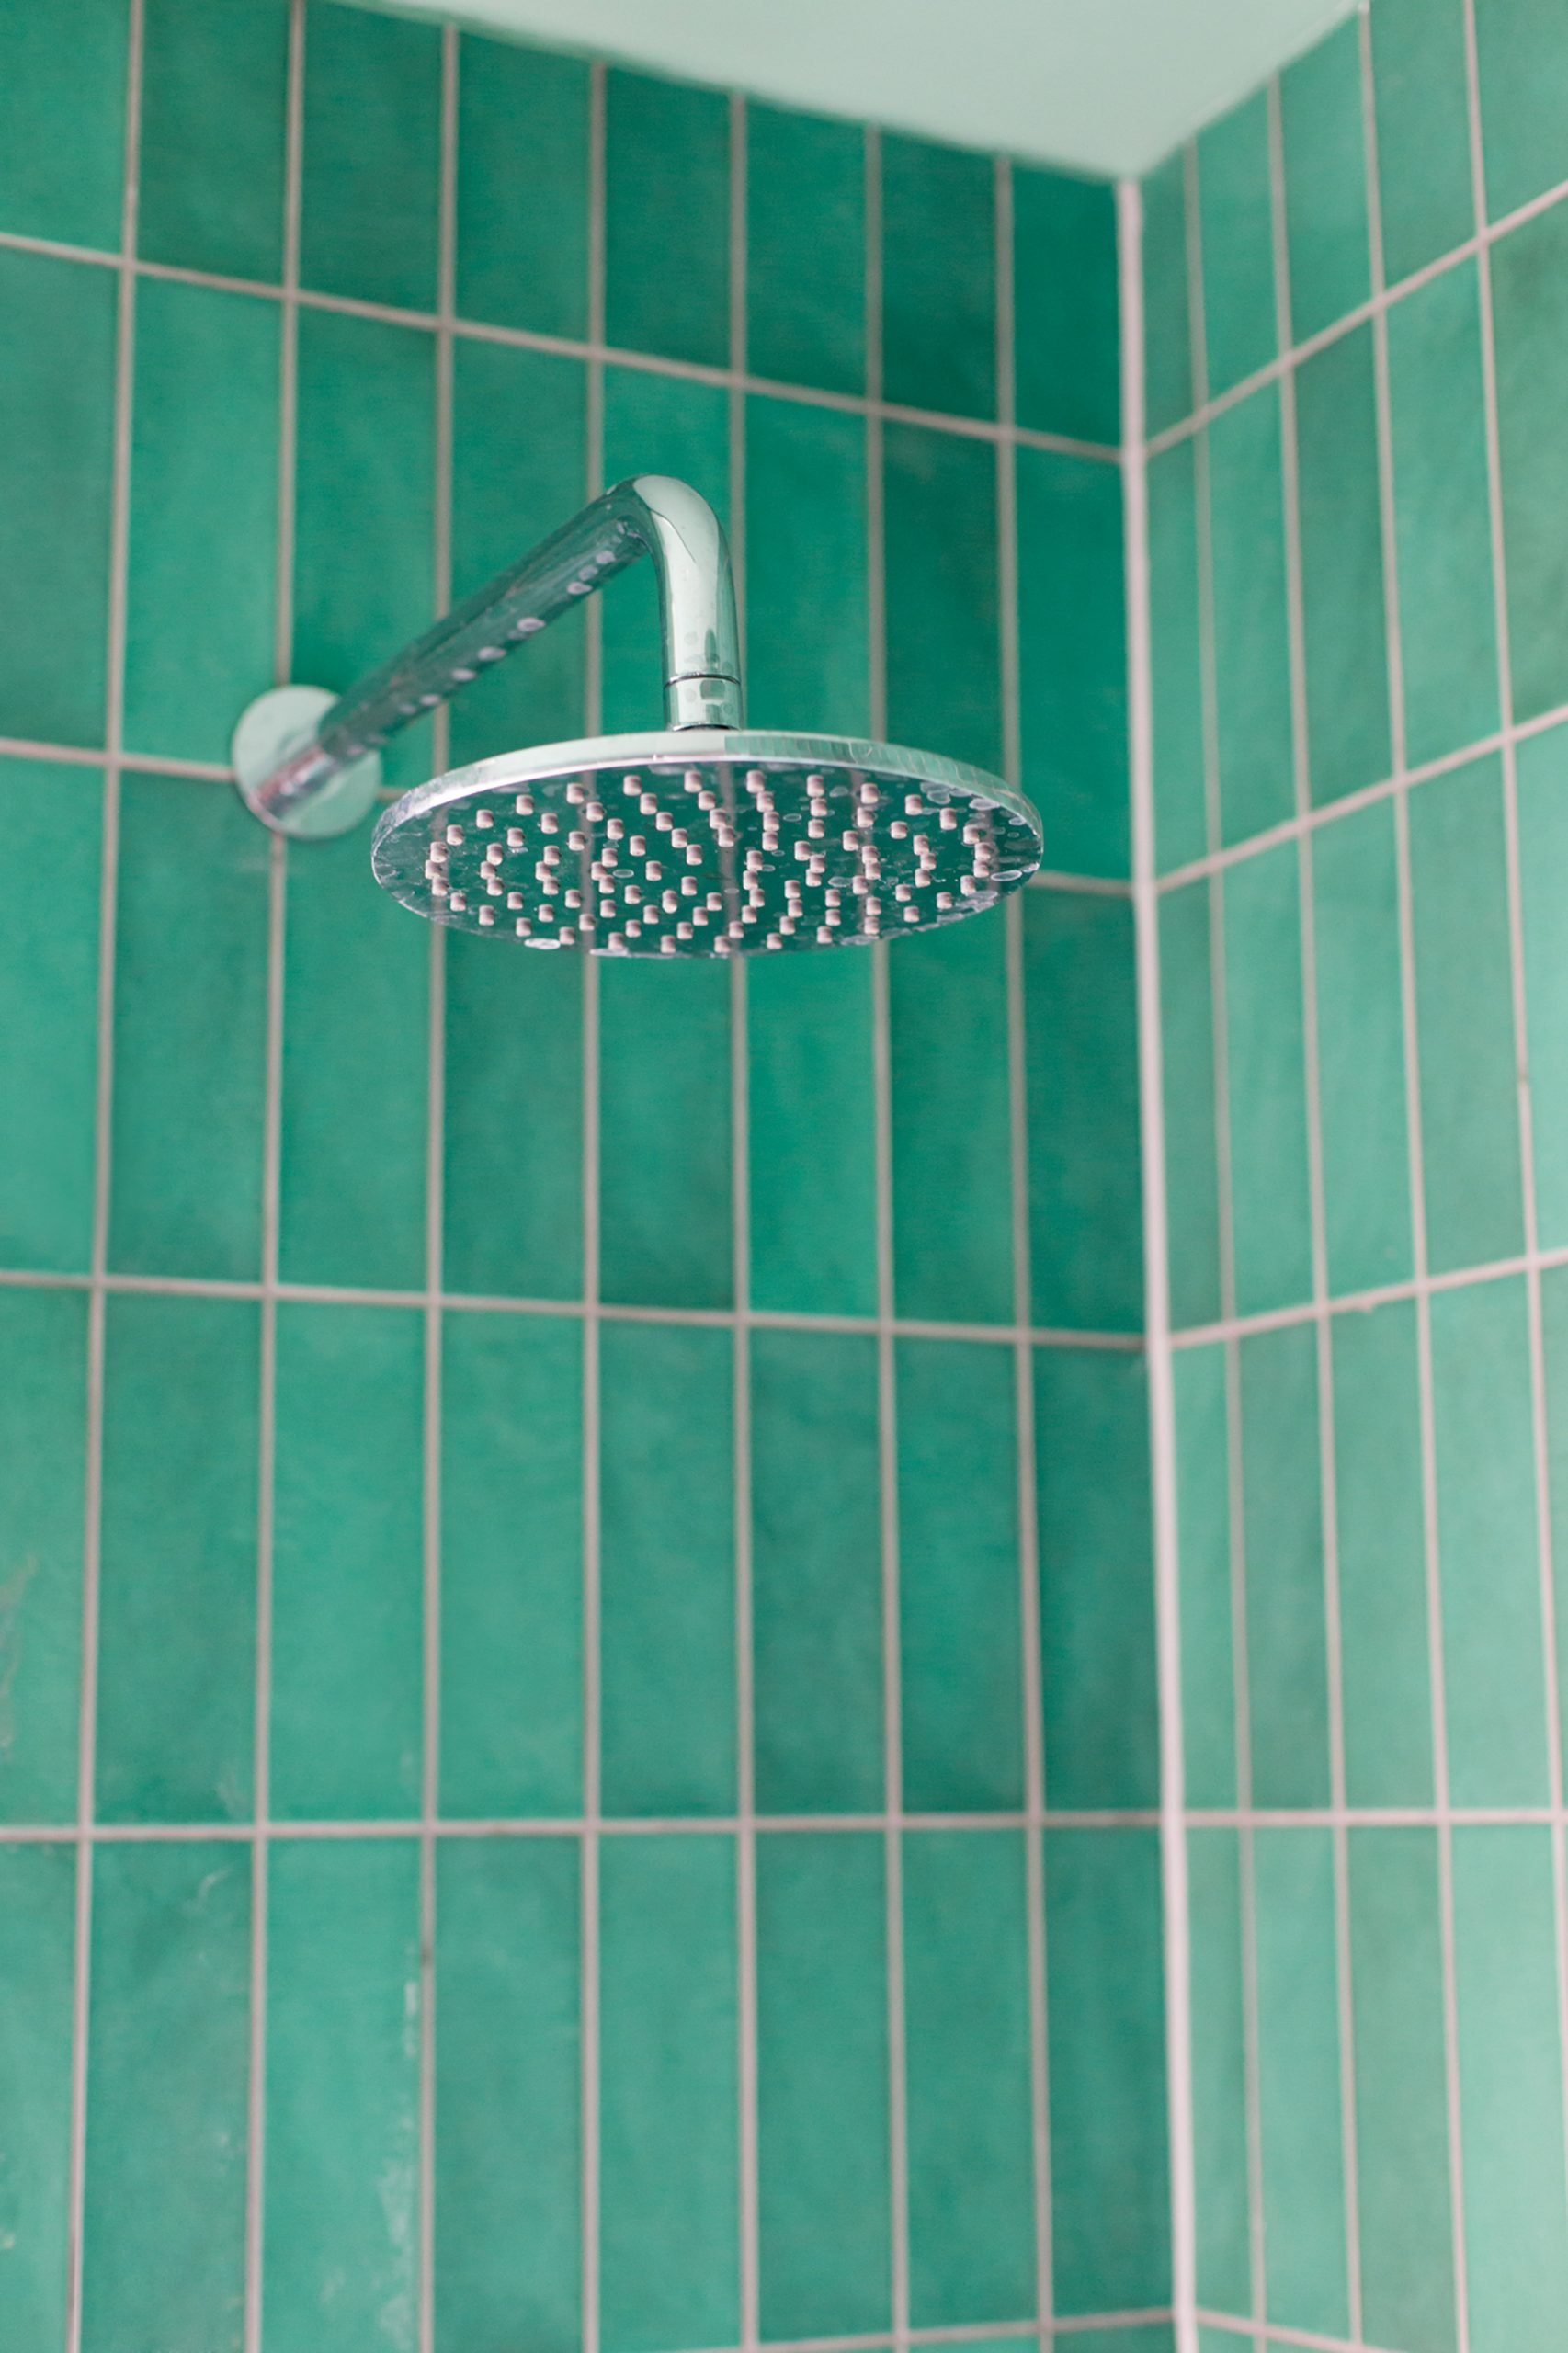 A shower lined with green tiles